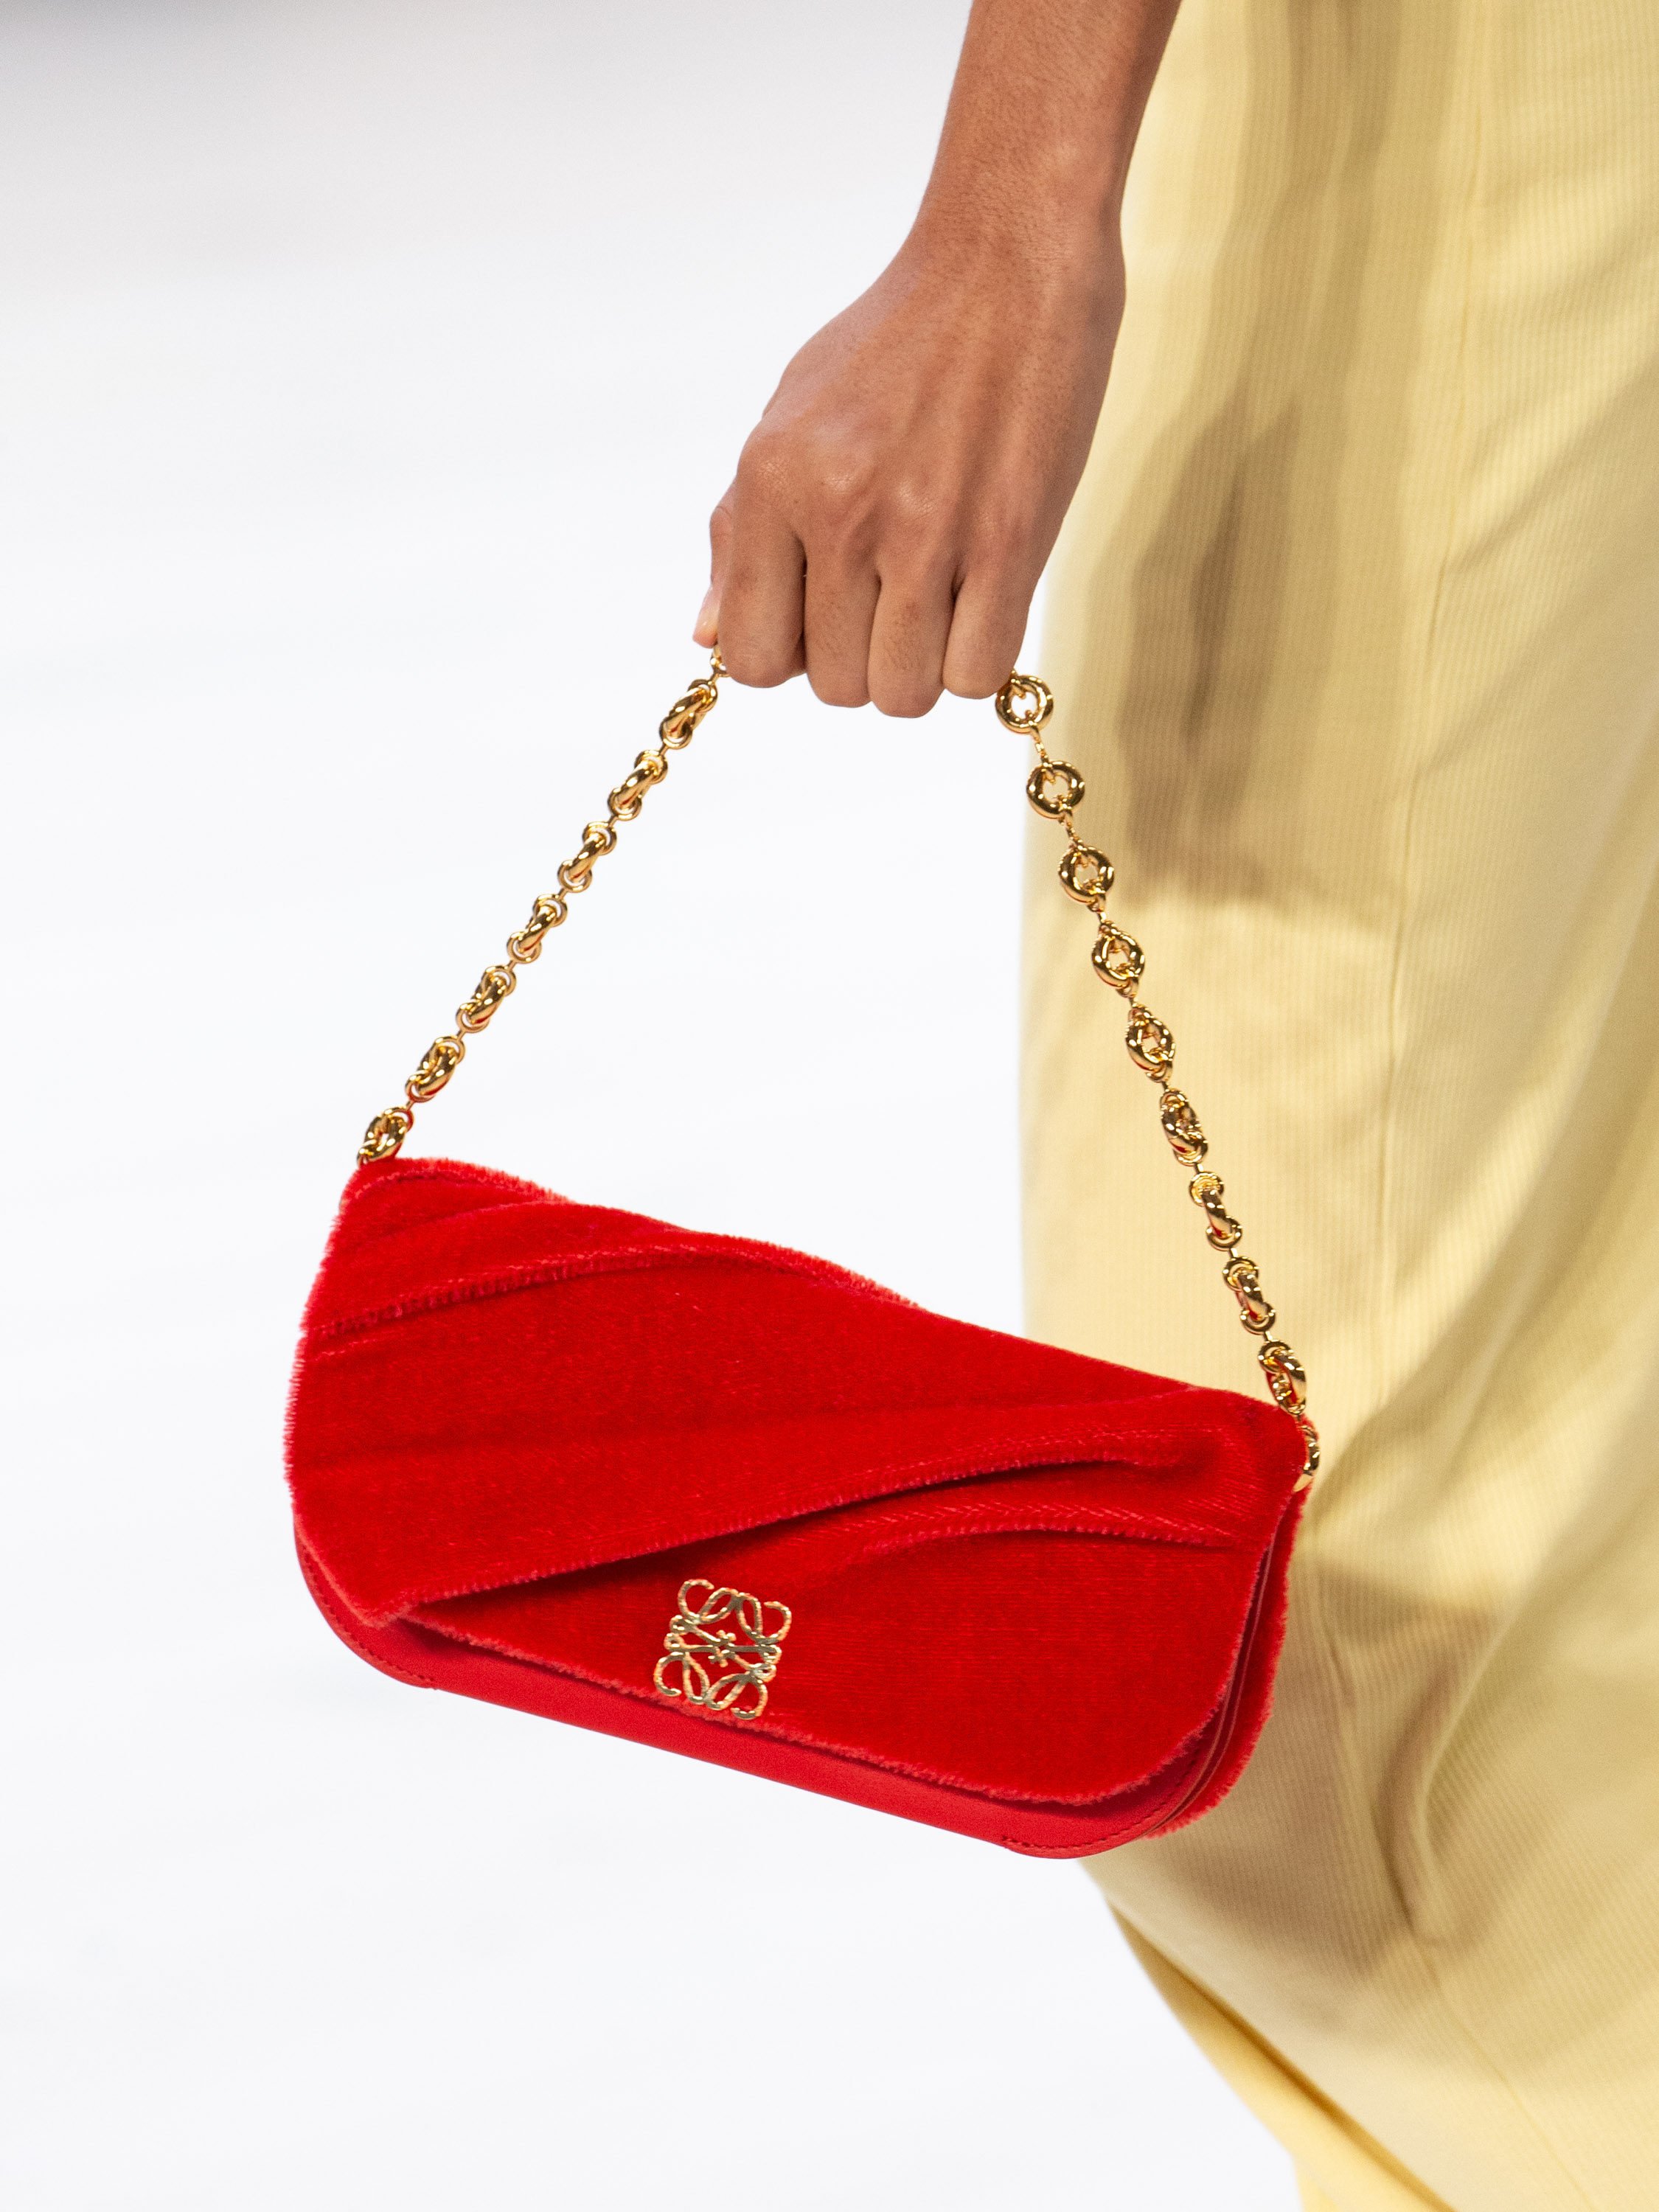 Loewe’s Goya clutch from its spring/summer 2022 collection. Photo: Handout